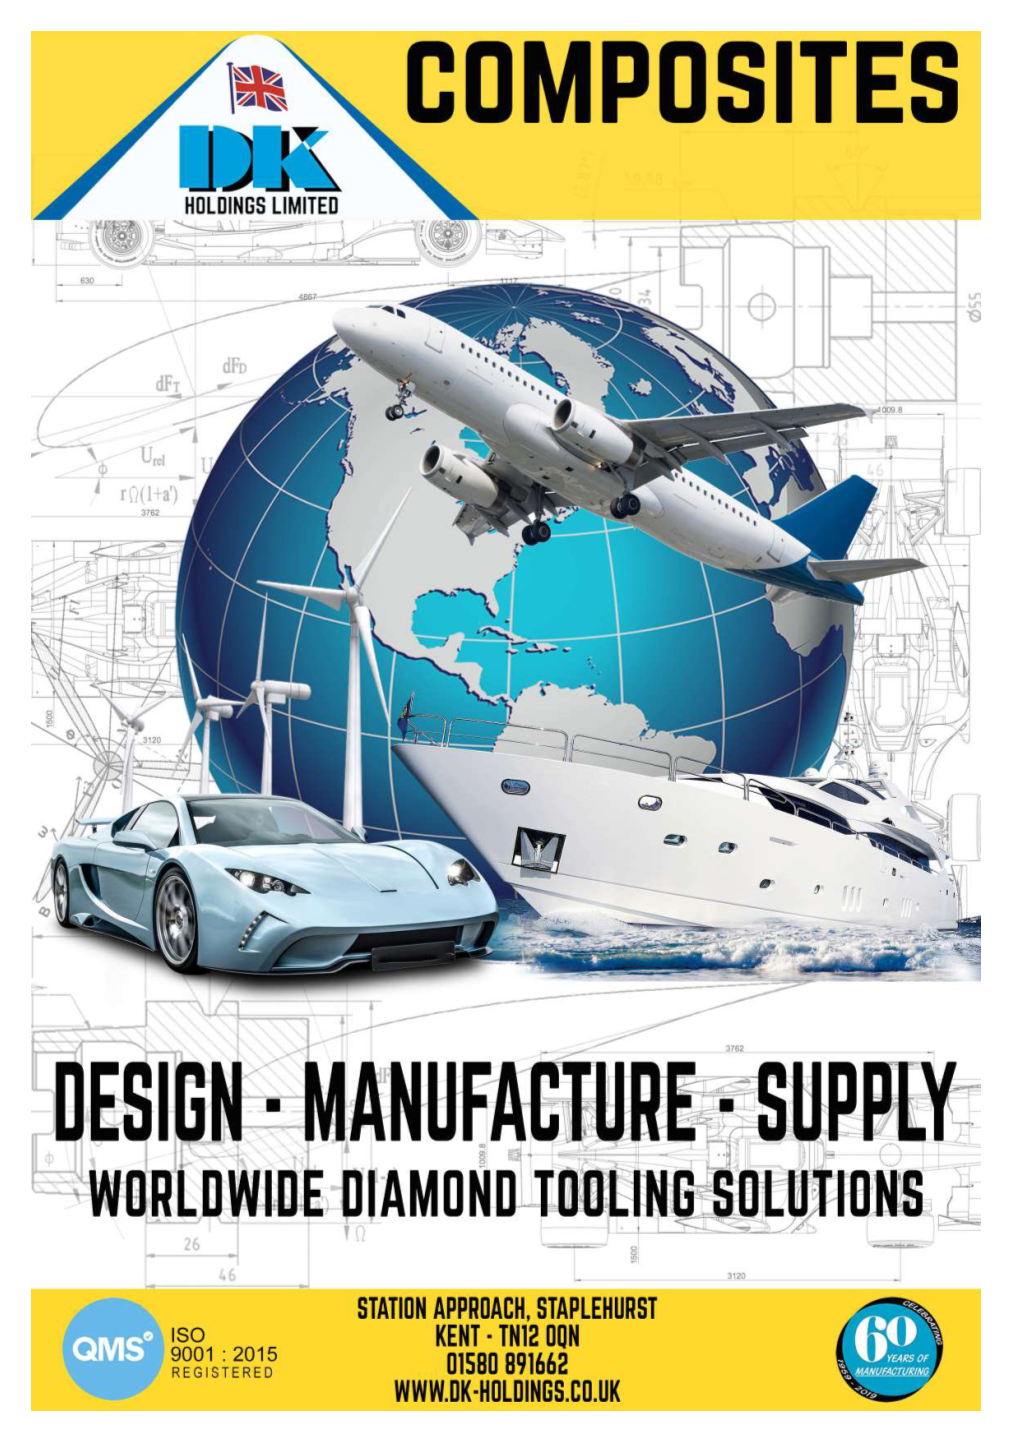 Diamond Tools and Associated Products Since 1959